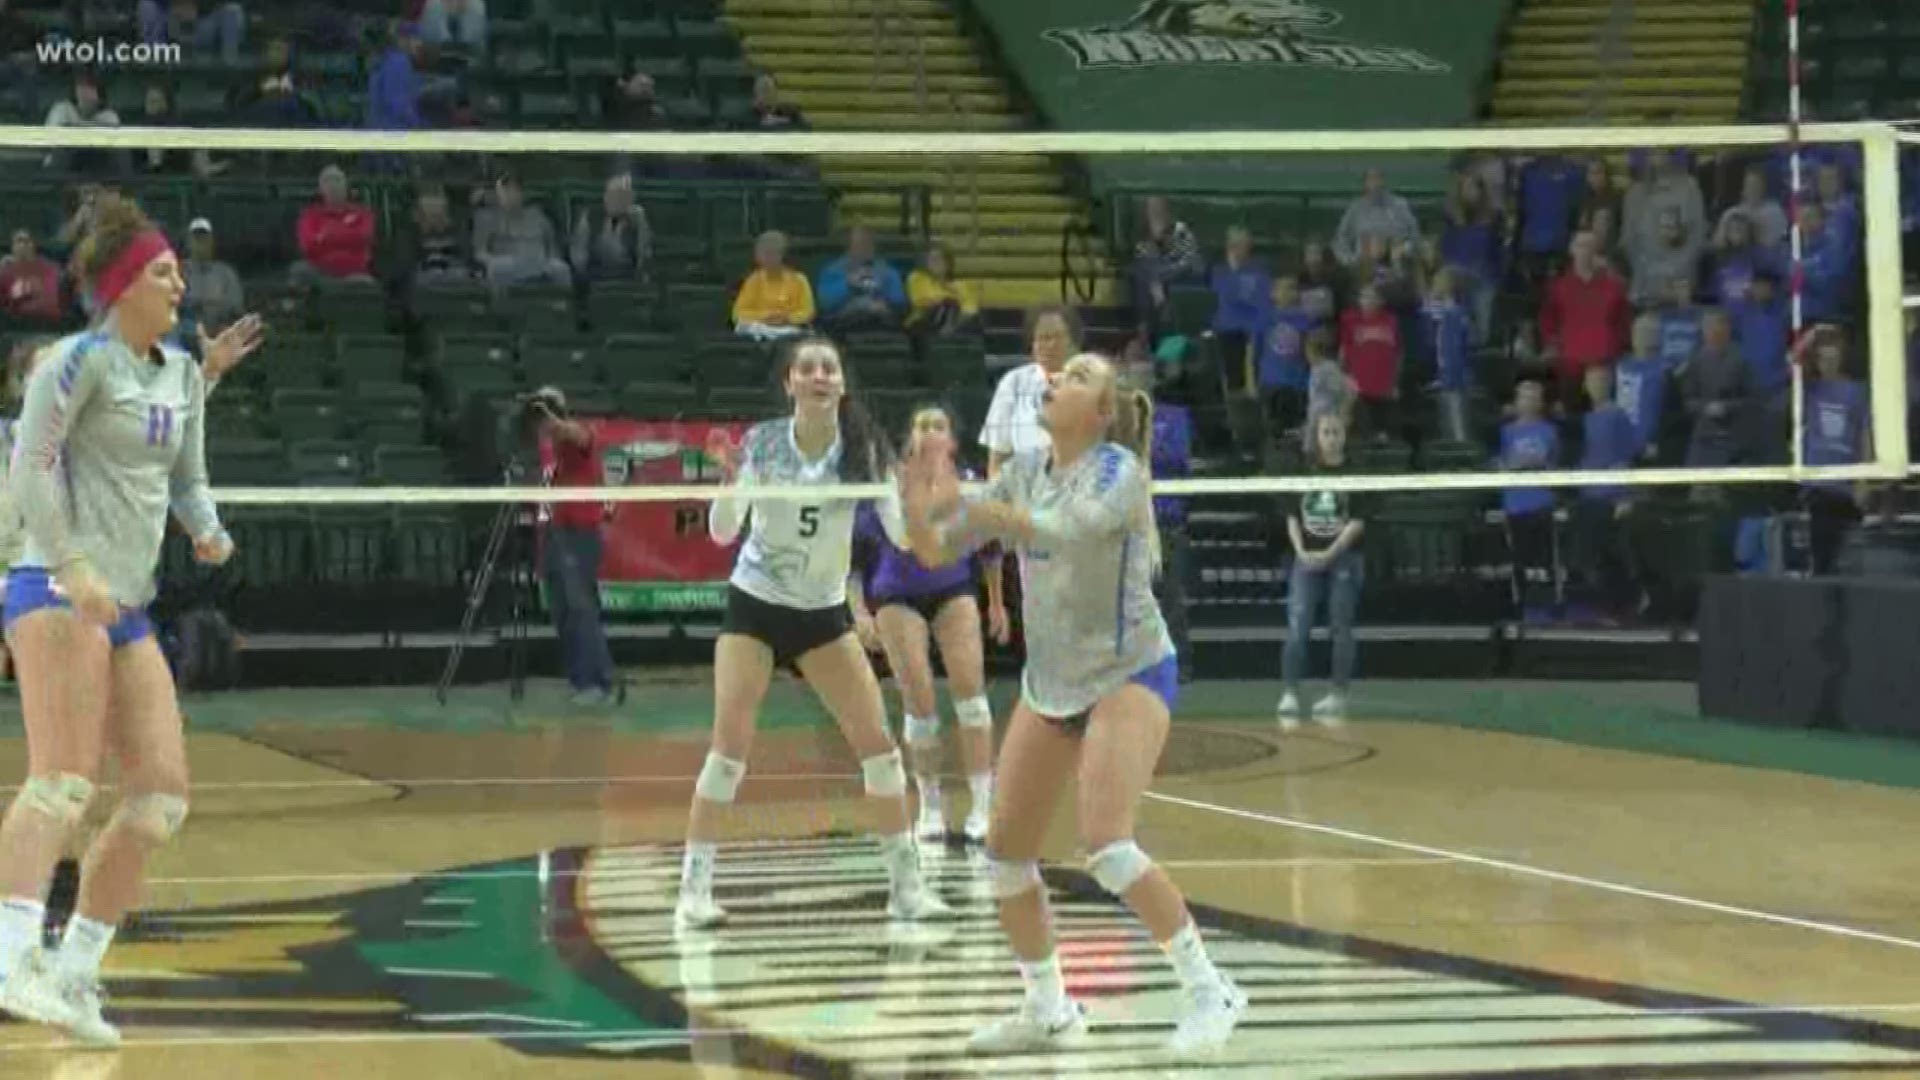 Liberty-Benton defeats Cincinnati Hills Christian in straight sets in first ever appearance at states.